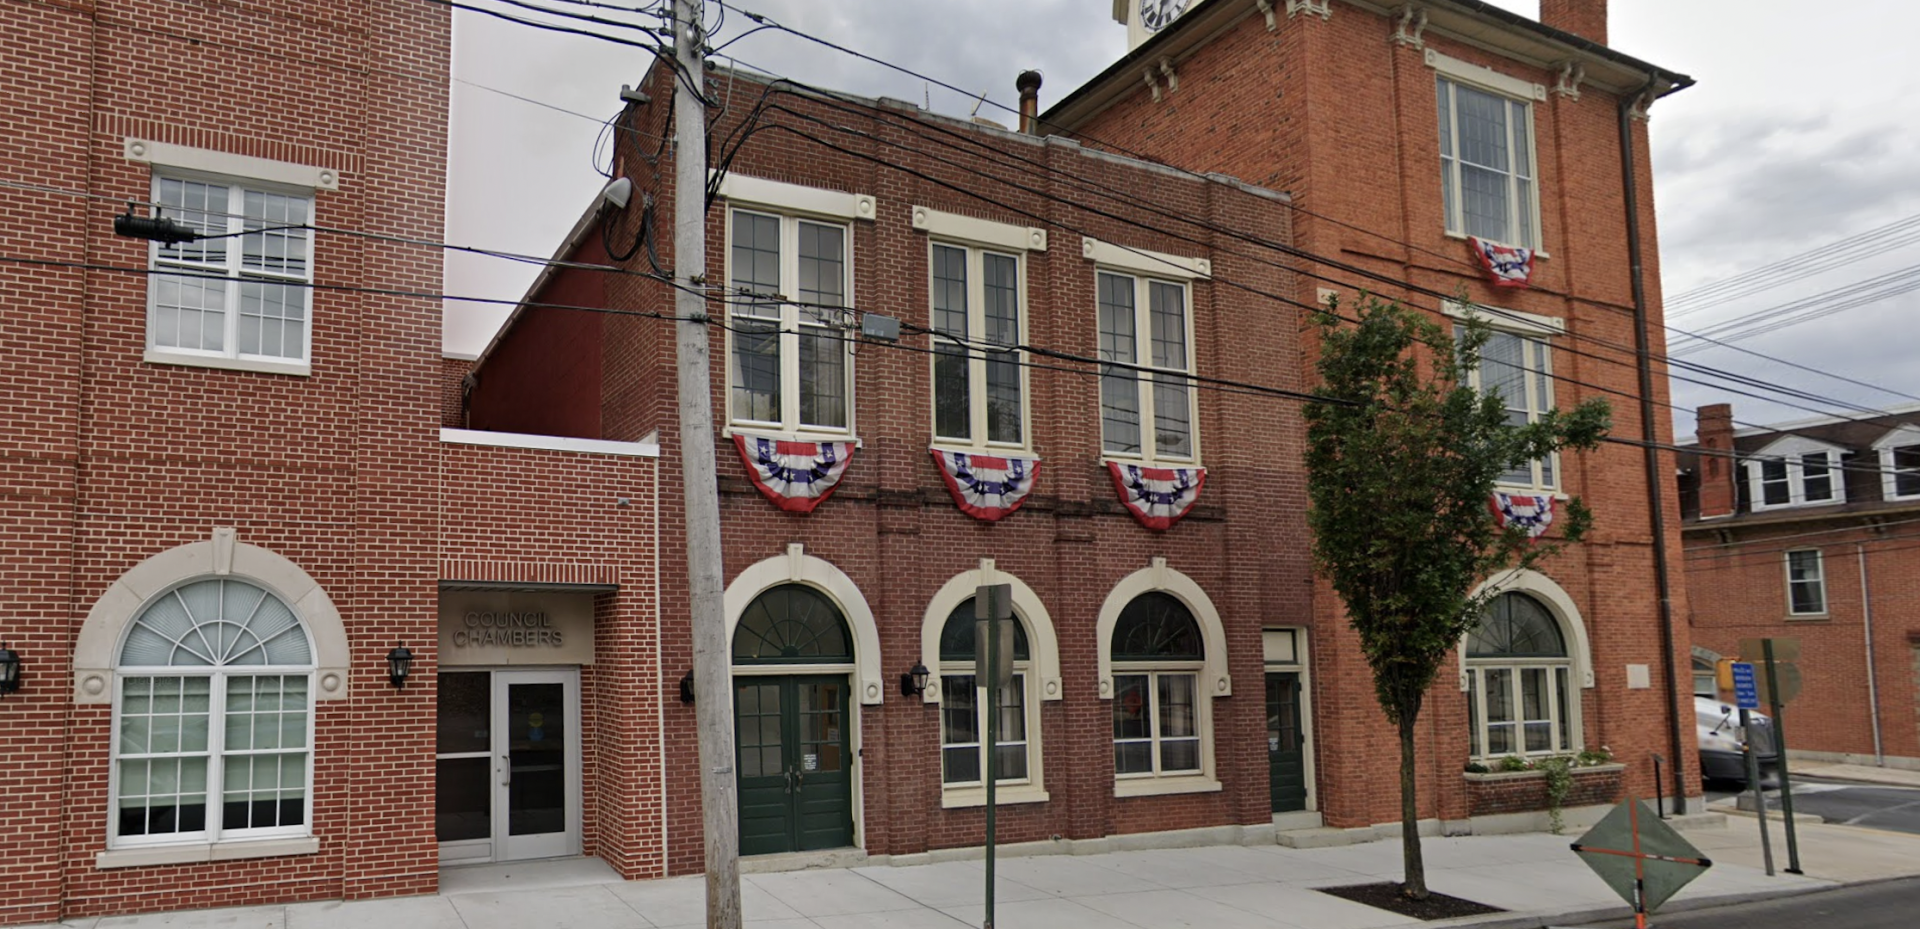 The Chambersburg Borough building is seen in this September 2019 screen capture from Google Streetview. 